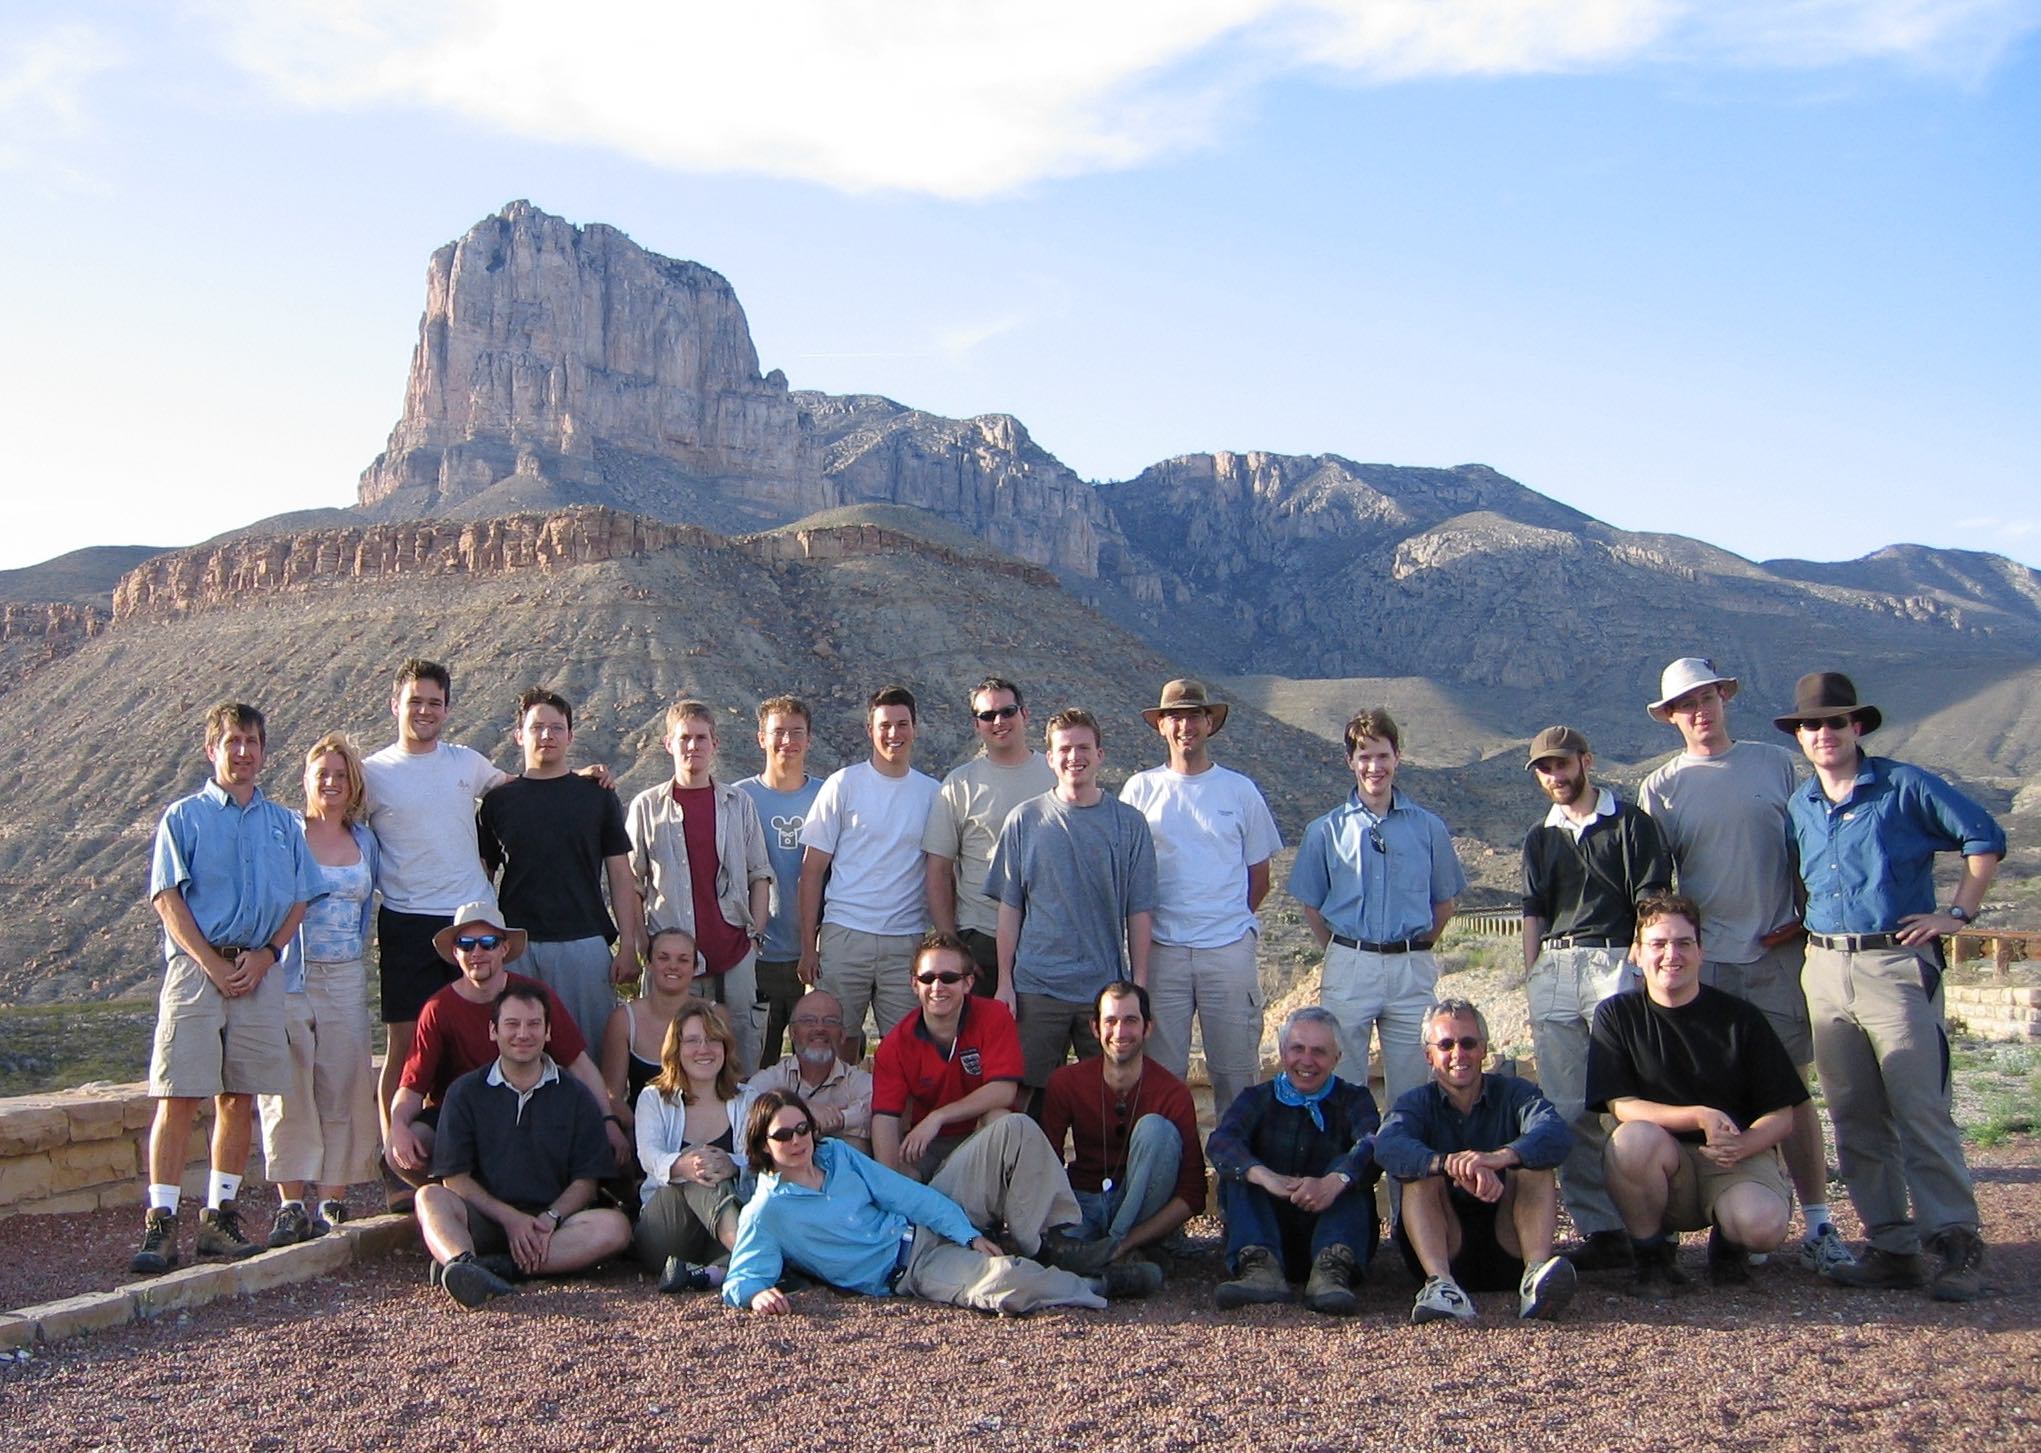 Group photo. 2004. In front of the world famous Permian Reef, Guadalupe Mountains on the Texas/New Mexico border. Present are leaders Art Saller and Tony Dickson, assisted by Nigel Woodcock 